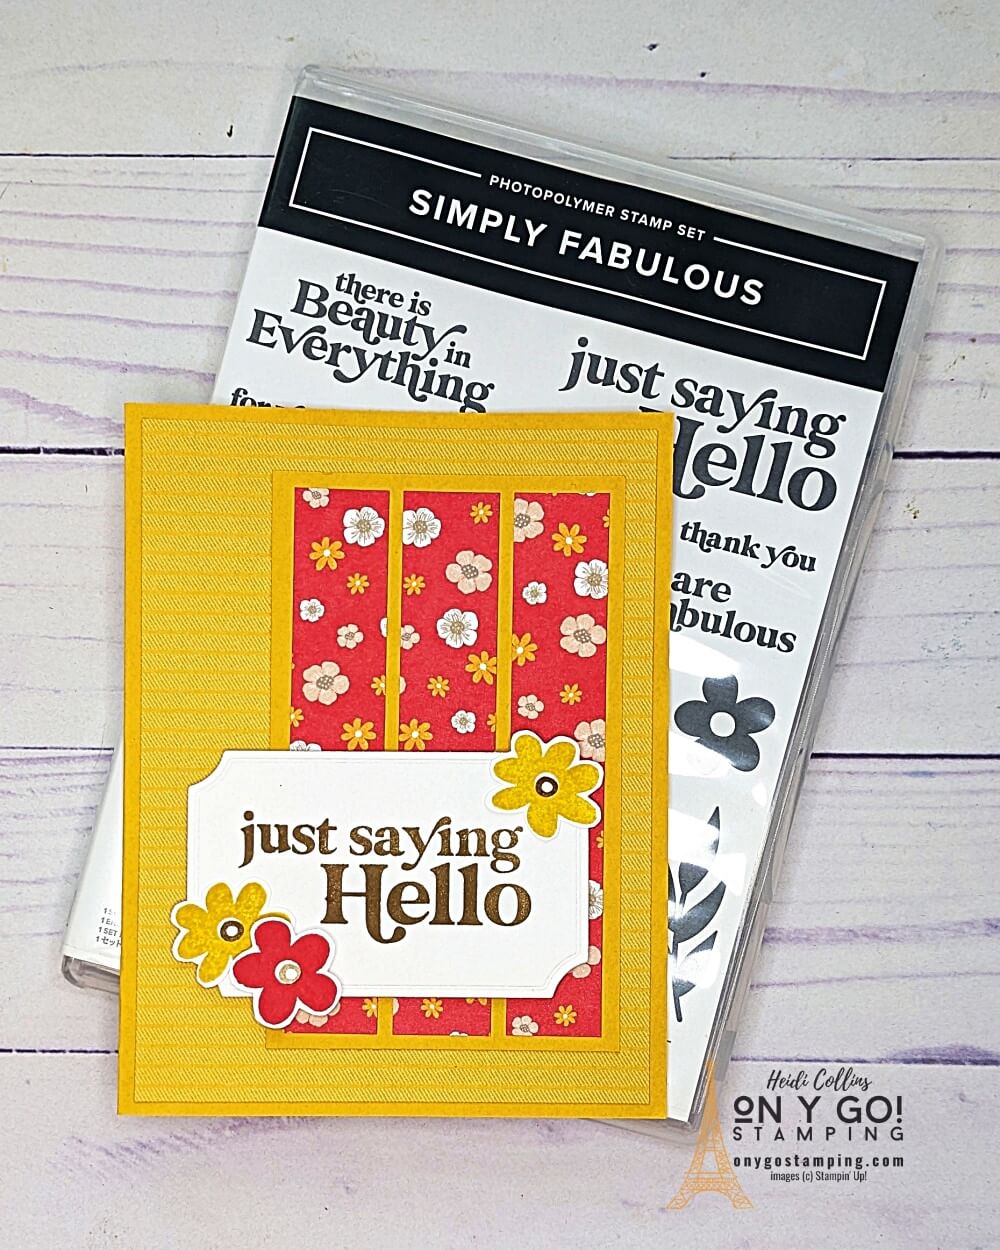 Create a quick and easy handmade card with a card sketch! Like this sample card design using the Simply Fabulous stamp set and Tea Boutique patterned paper from Stampin' Up!®